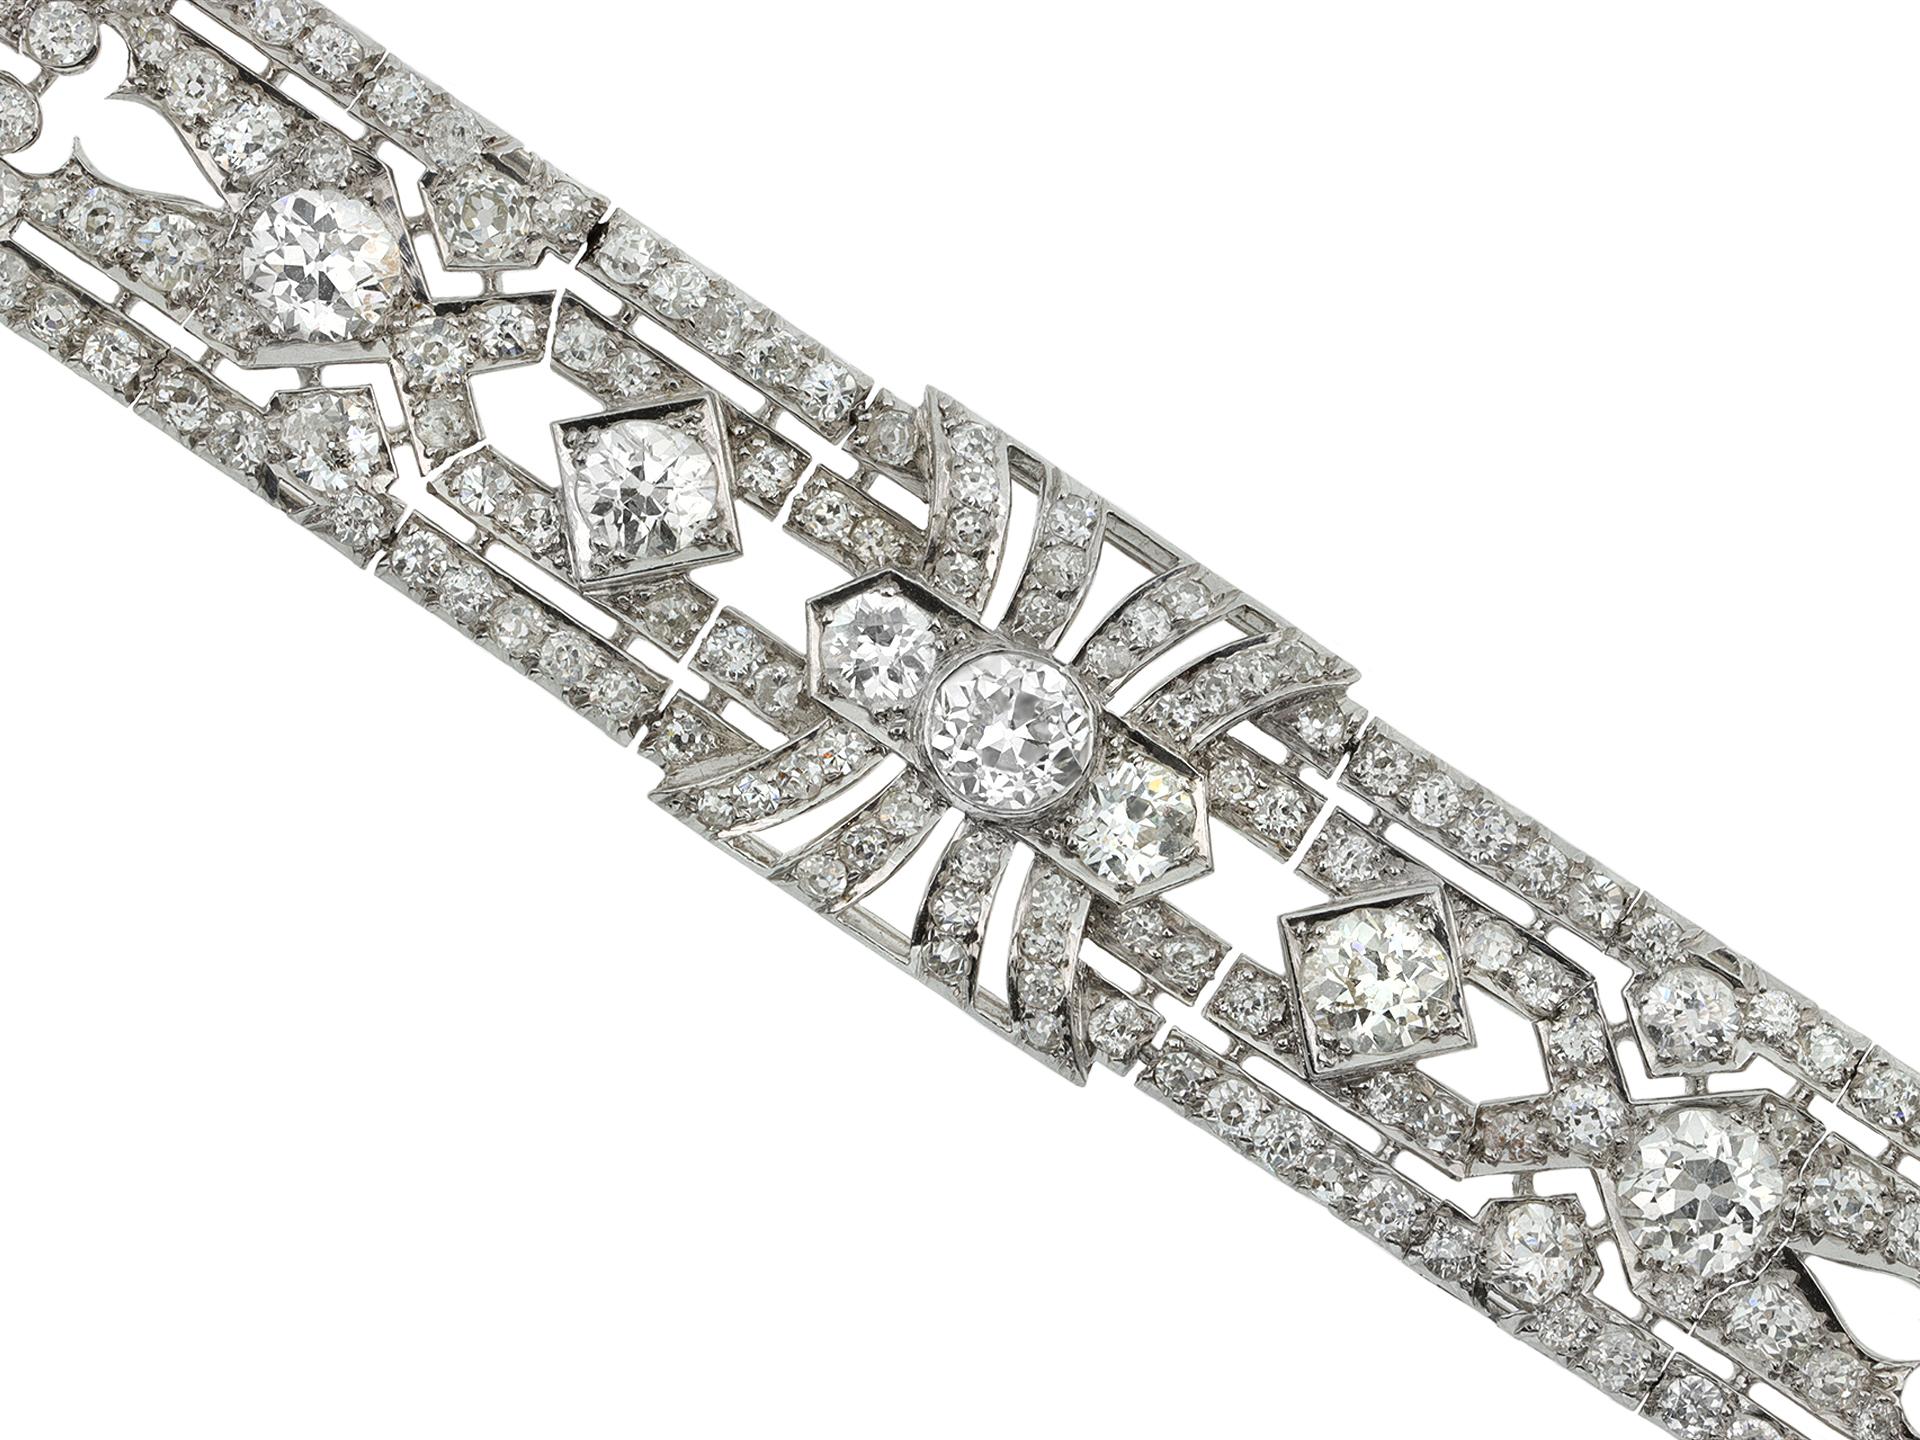 Exceptional diamond bracelet in platinum. Old cut diamonds throughout weighing approximately 17.50ct in total. Openwork, pave set, sectional bracelet with Fleur-de-Lys detail, fully articulated with safety chain. Mounted and set in platinum,